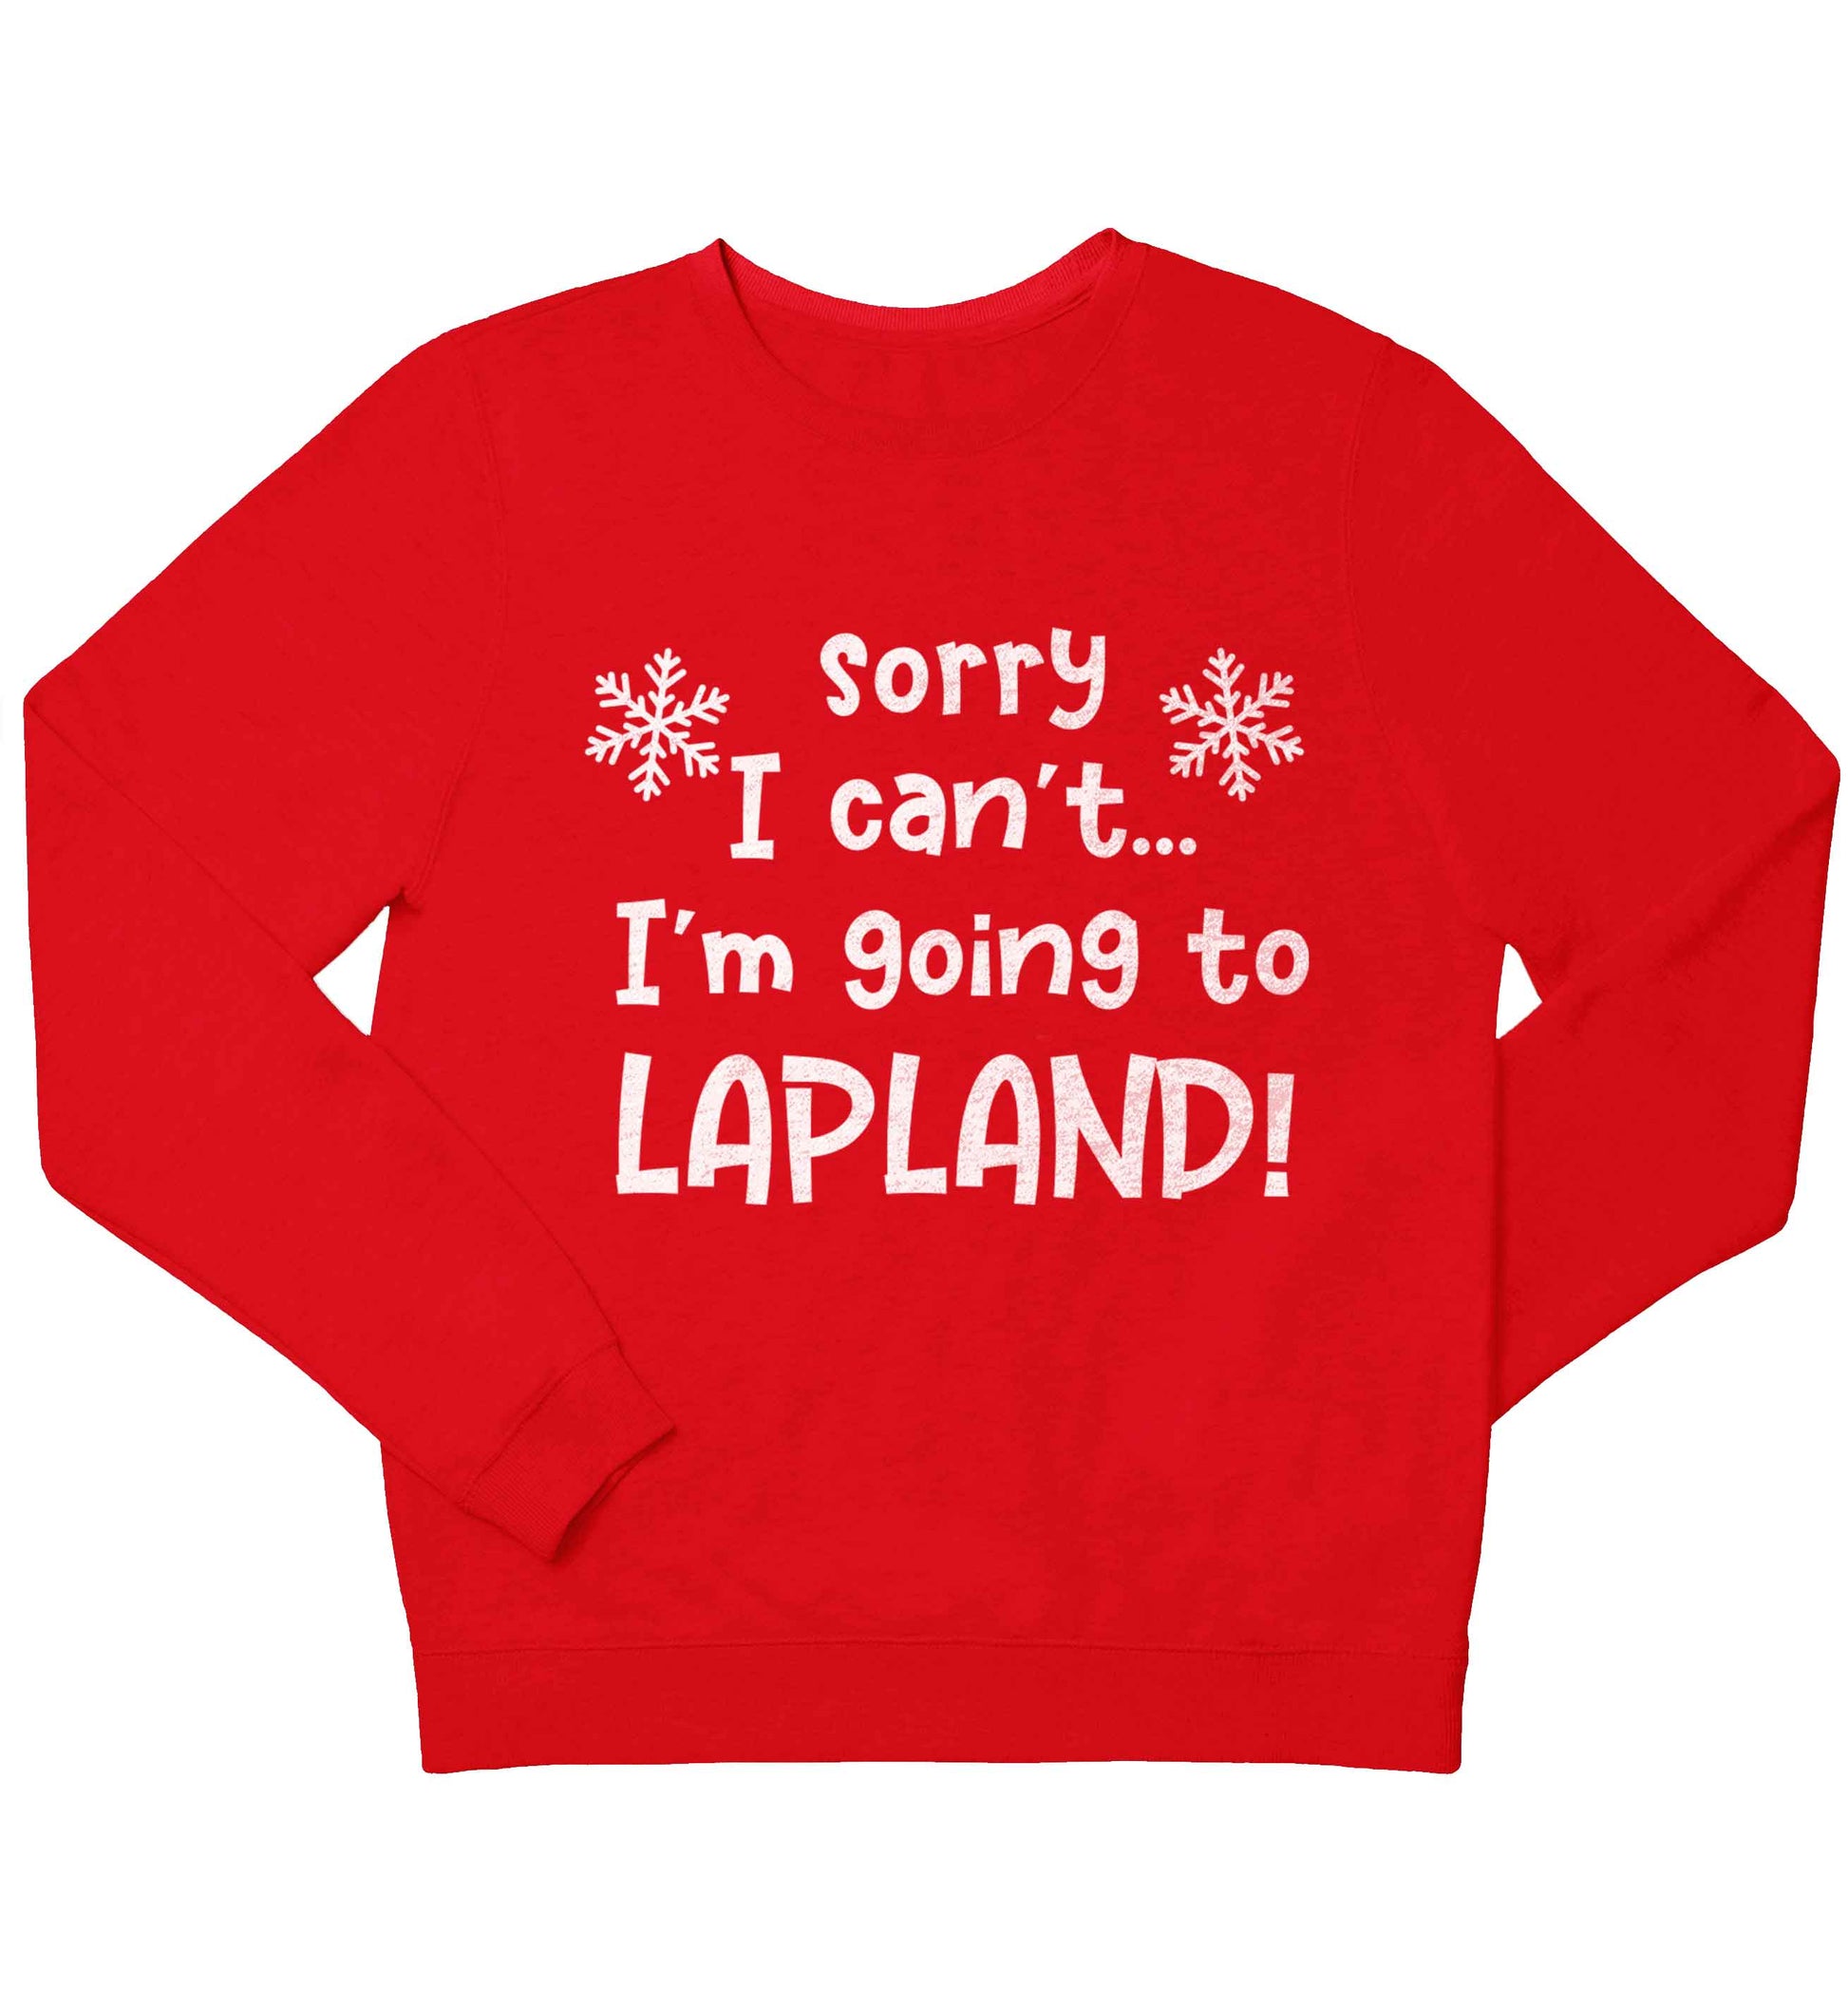 Sorry I can't I'm going to Lapland children's grey sweater 12-13 Years